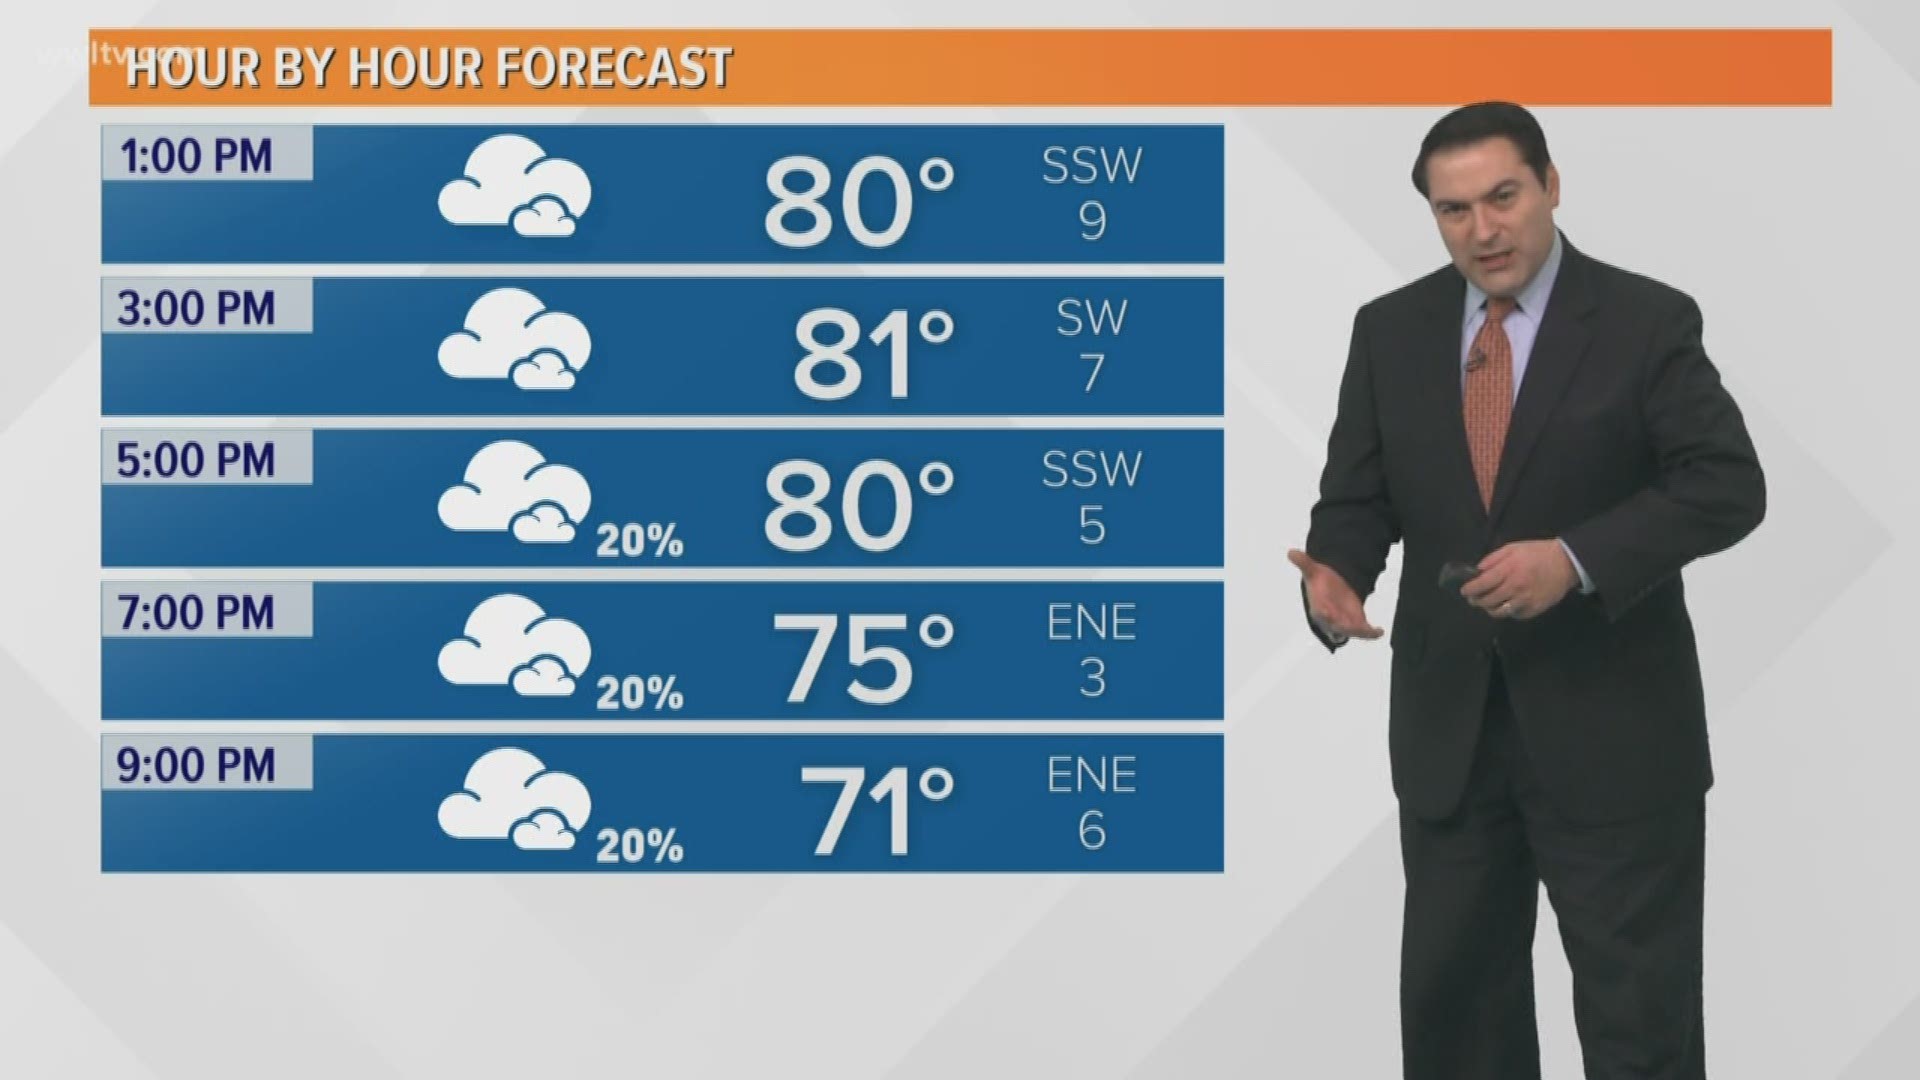 Meteorologist Dave Nussbaum says it will be a warm and humid day with a slight chance for a shower in New Orleans. Much cooler weather returns this weekend.